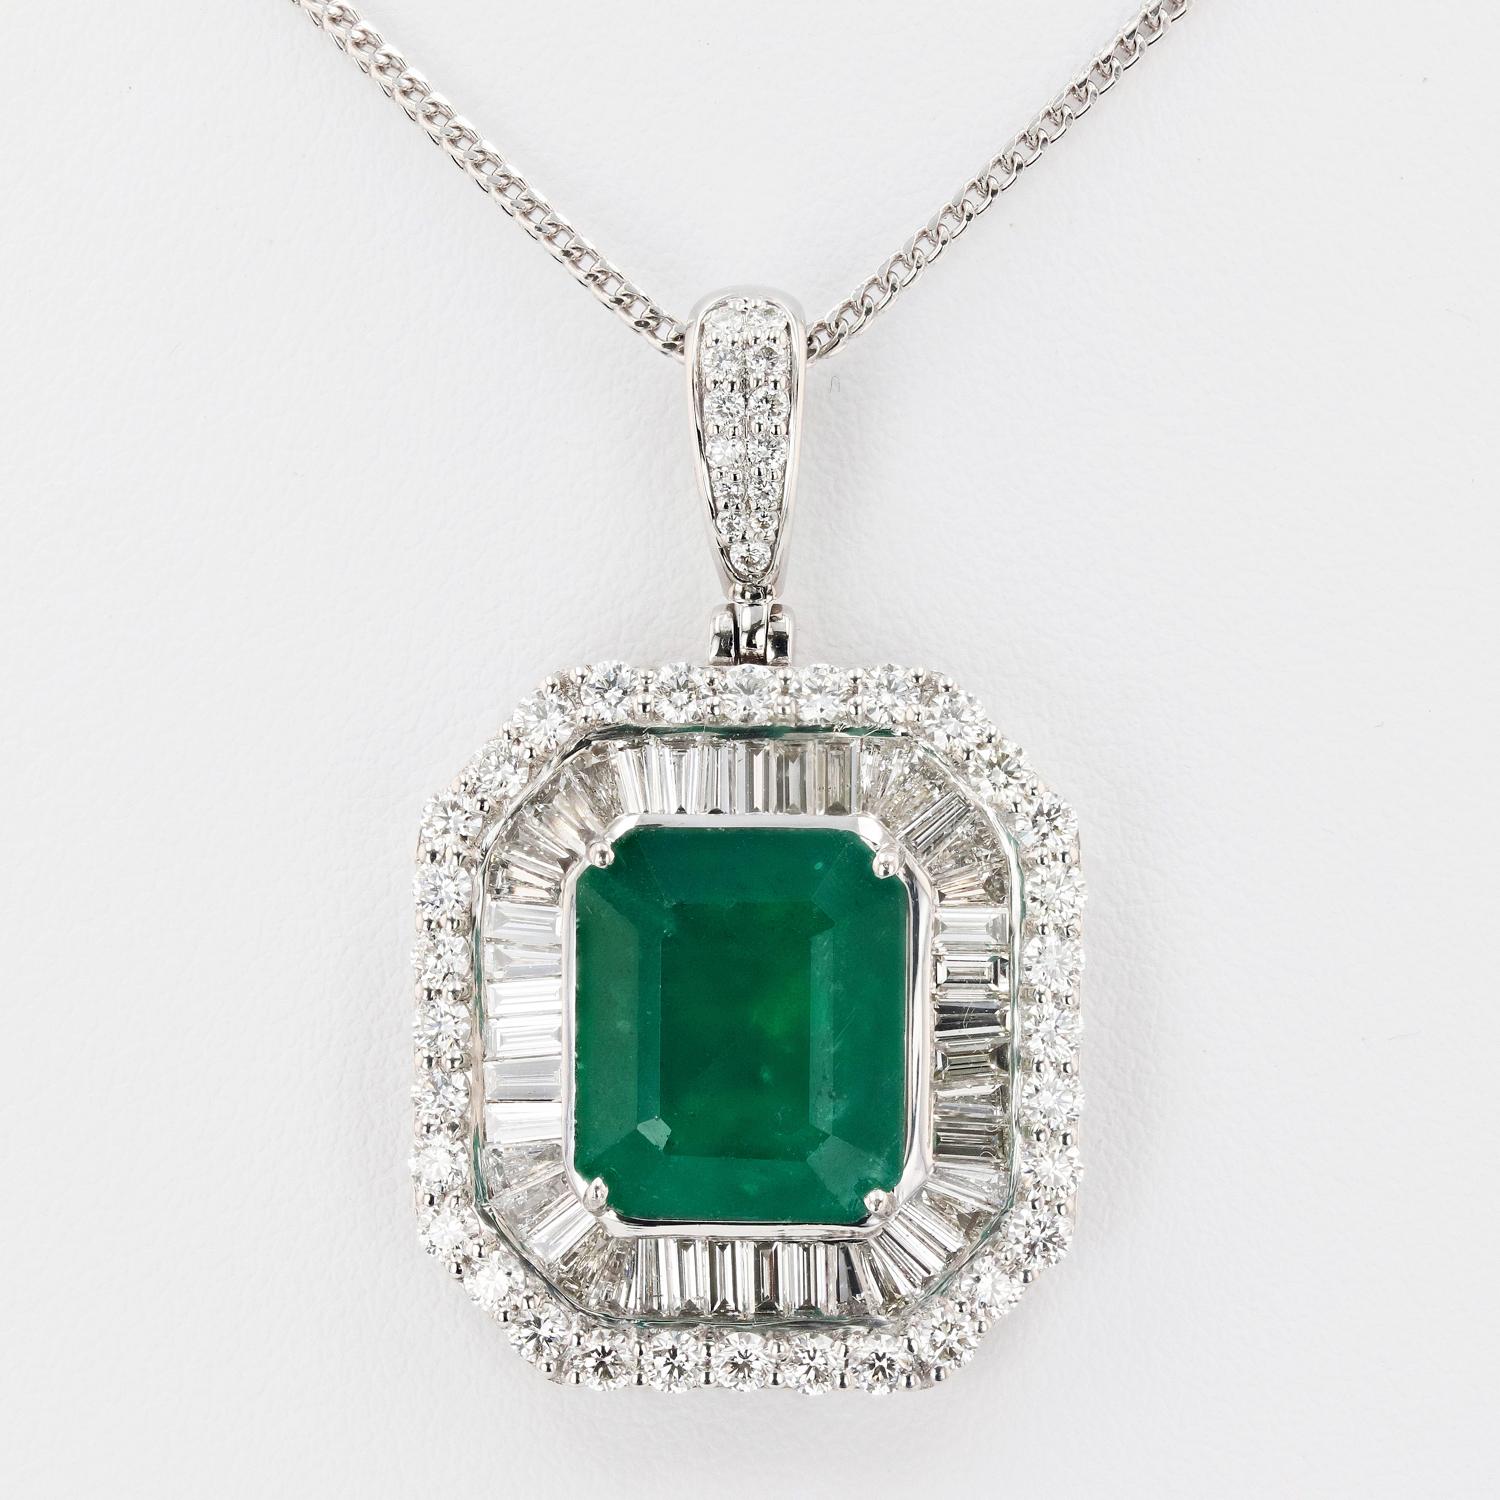 One polished, stamped, and tested platinum pendant mounted with: 1 genuine GIA certified emerald center stone weighing 10.28 carats, and 88 genuine faceted diamonds weighing approximately 3.51 carats. The pendant hangs from a platinum link chain